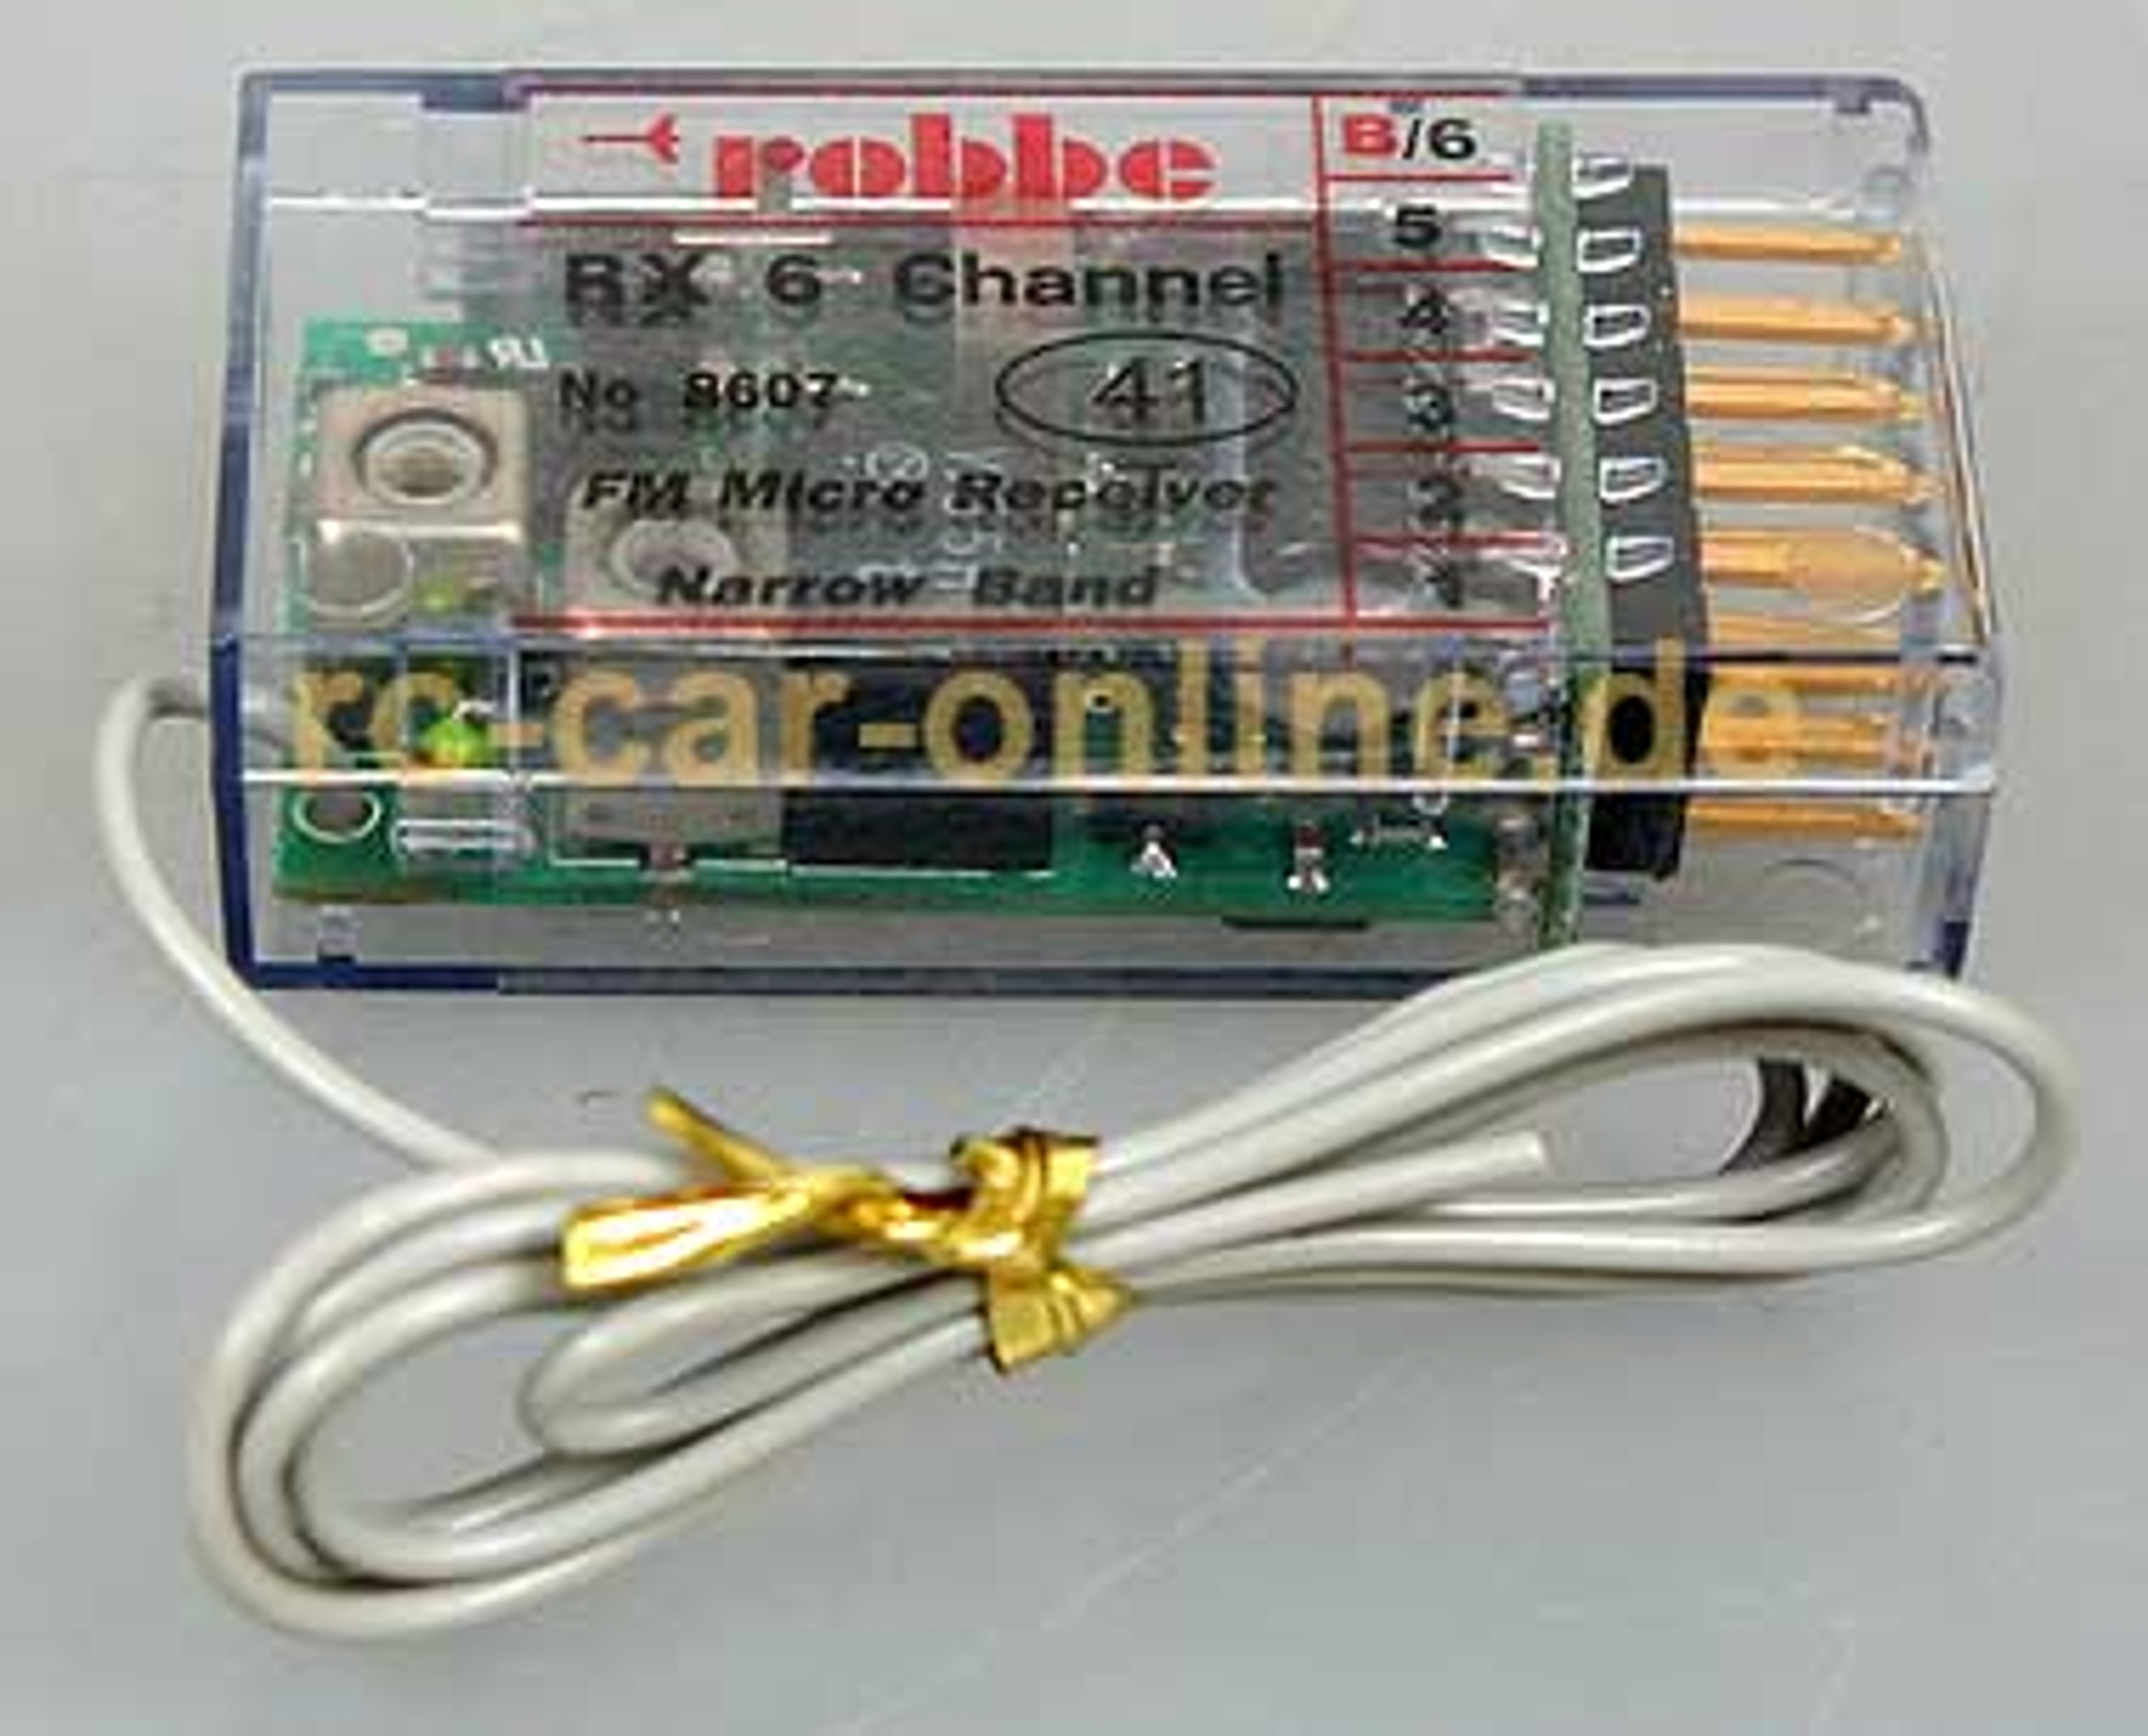 Robbe 41MHz micro-receiver RX 6